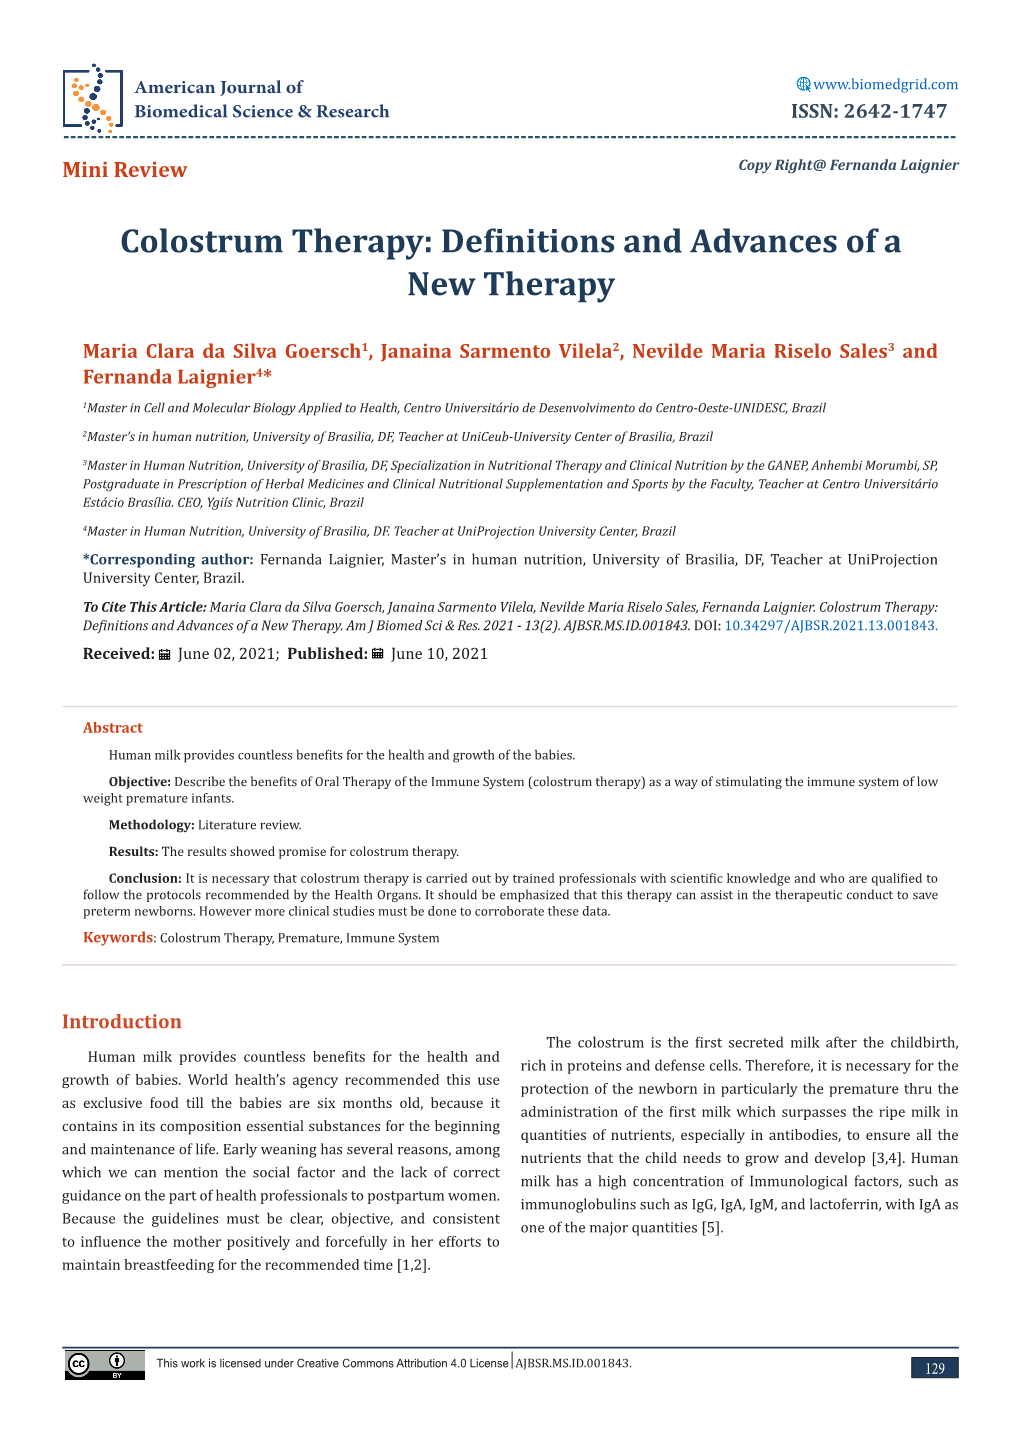 Colostrum Therapy: Definitions and Advances of a New Therapy